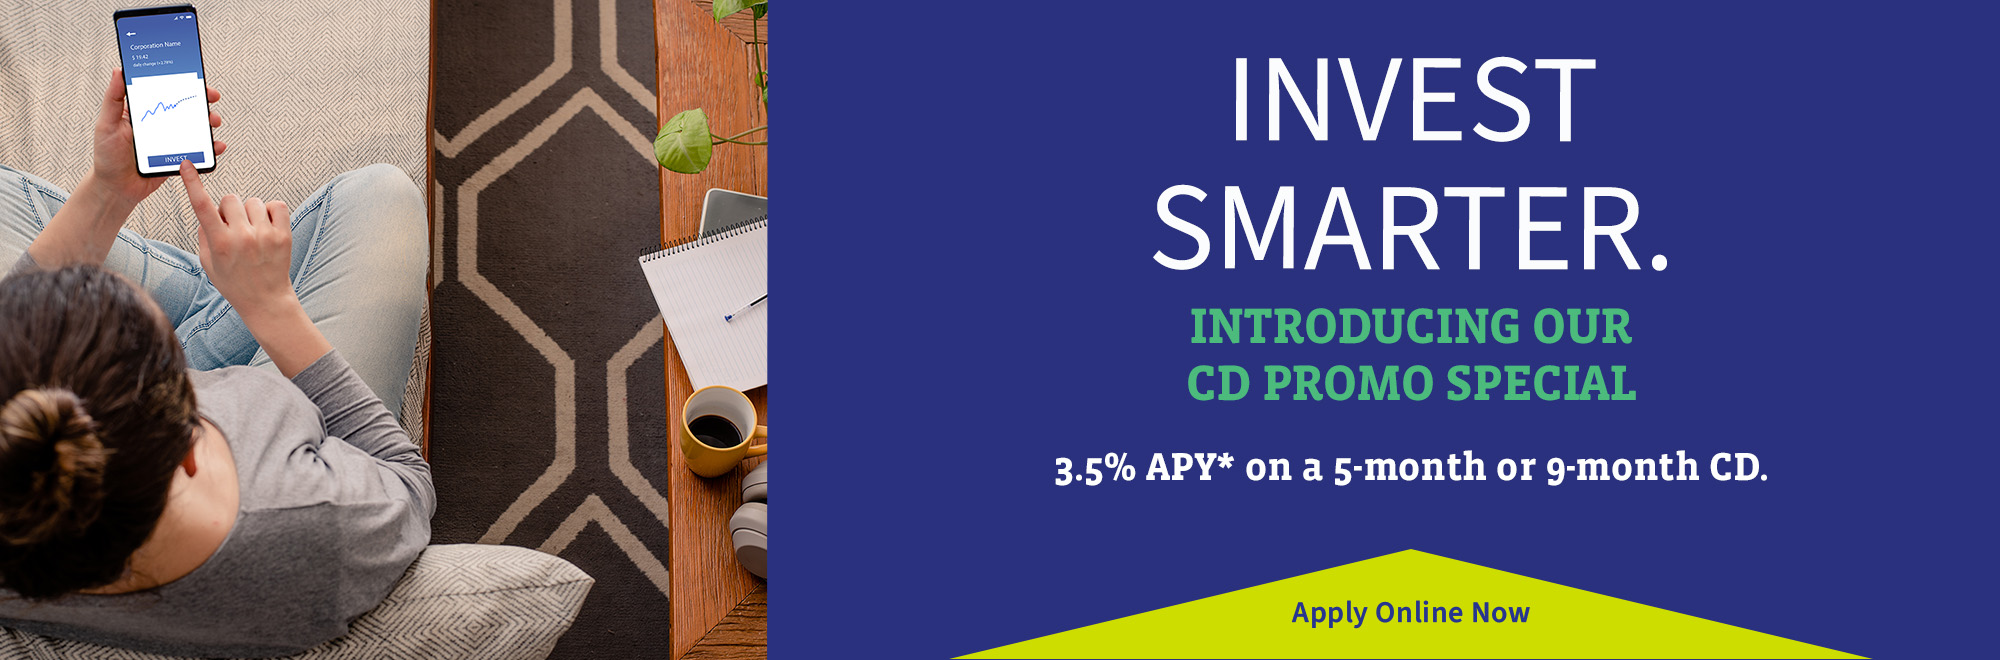 Invest Smarter. Introducing our 5-month CD Promo Special. 1.50% APY. Apply Online Now.